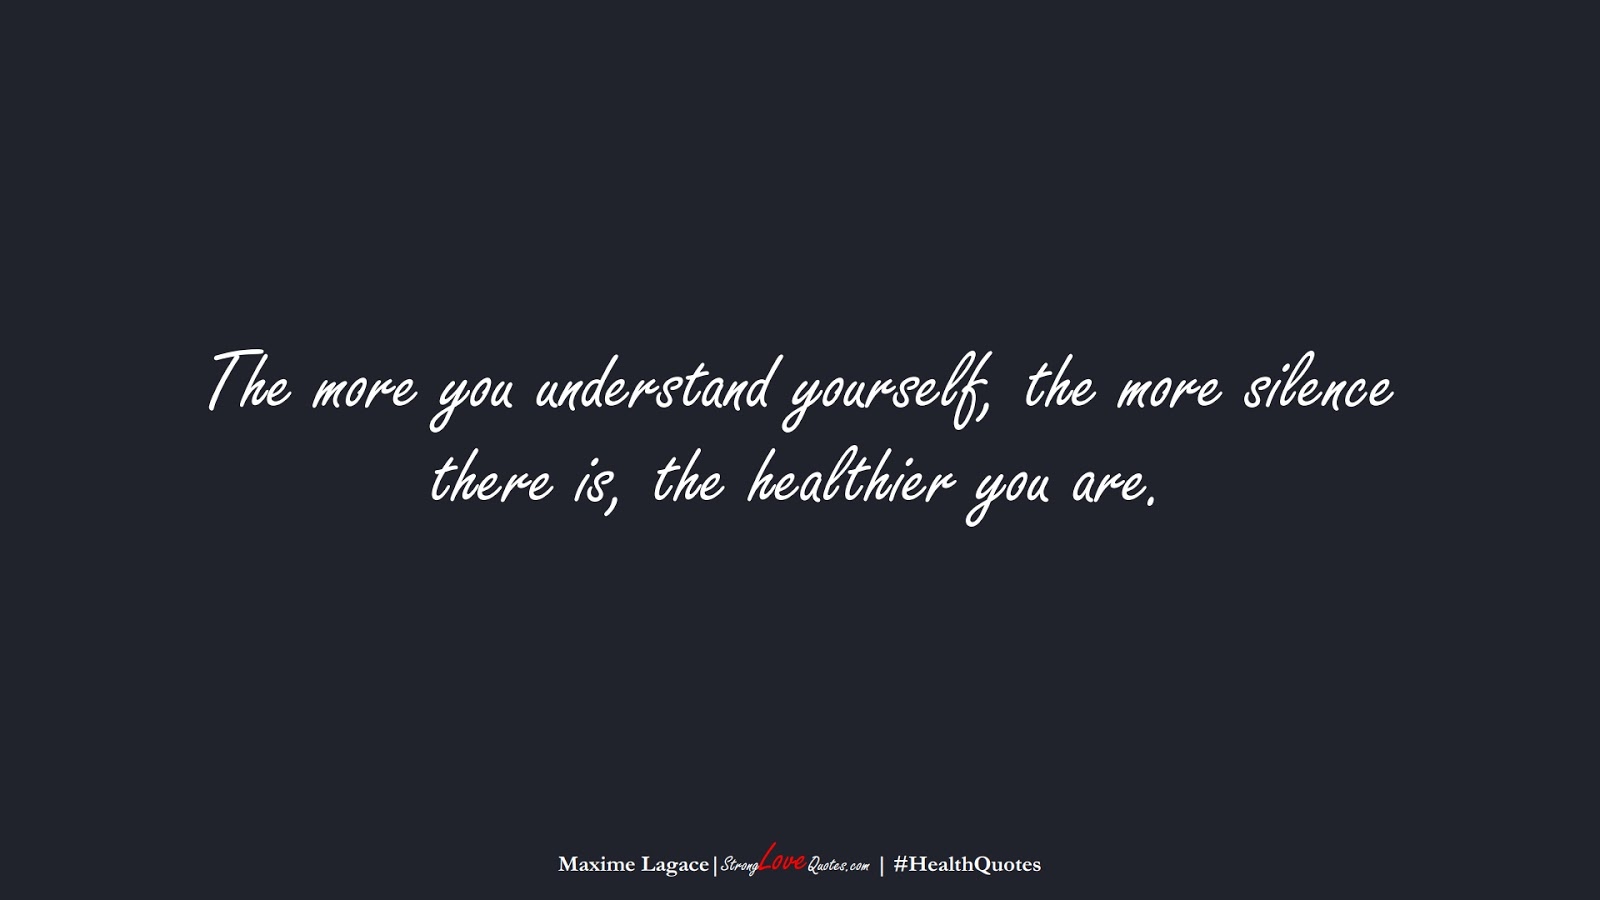 The more you understand yourself, the more silence there is, the healthier you are. (Maxime Lagace);  #HealthQuotes